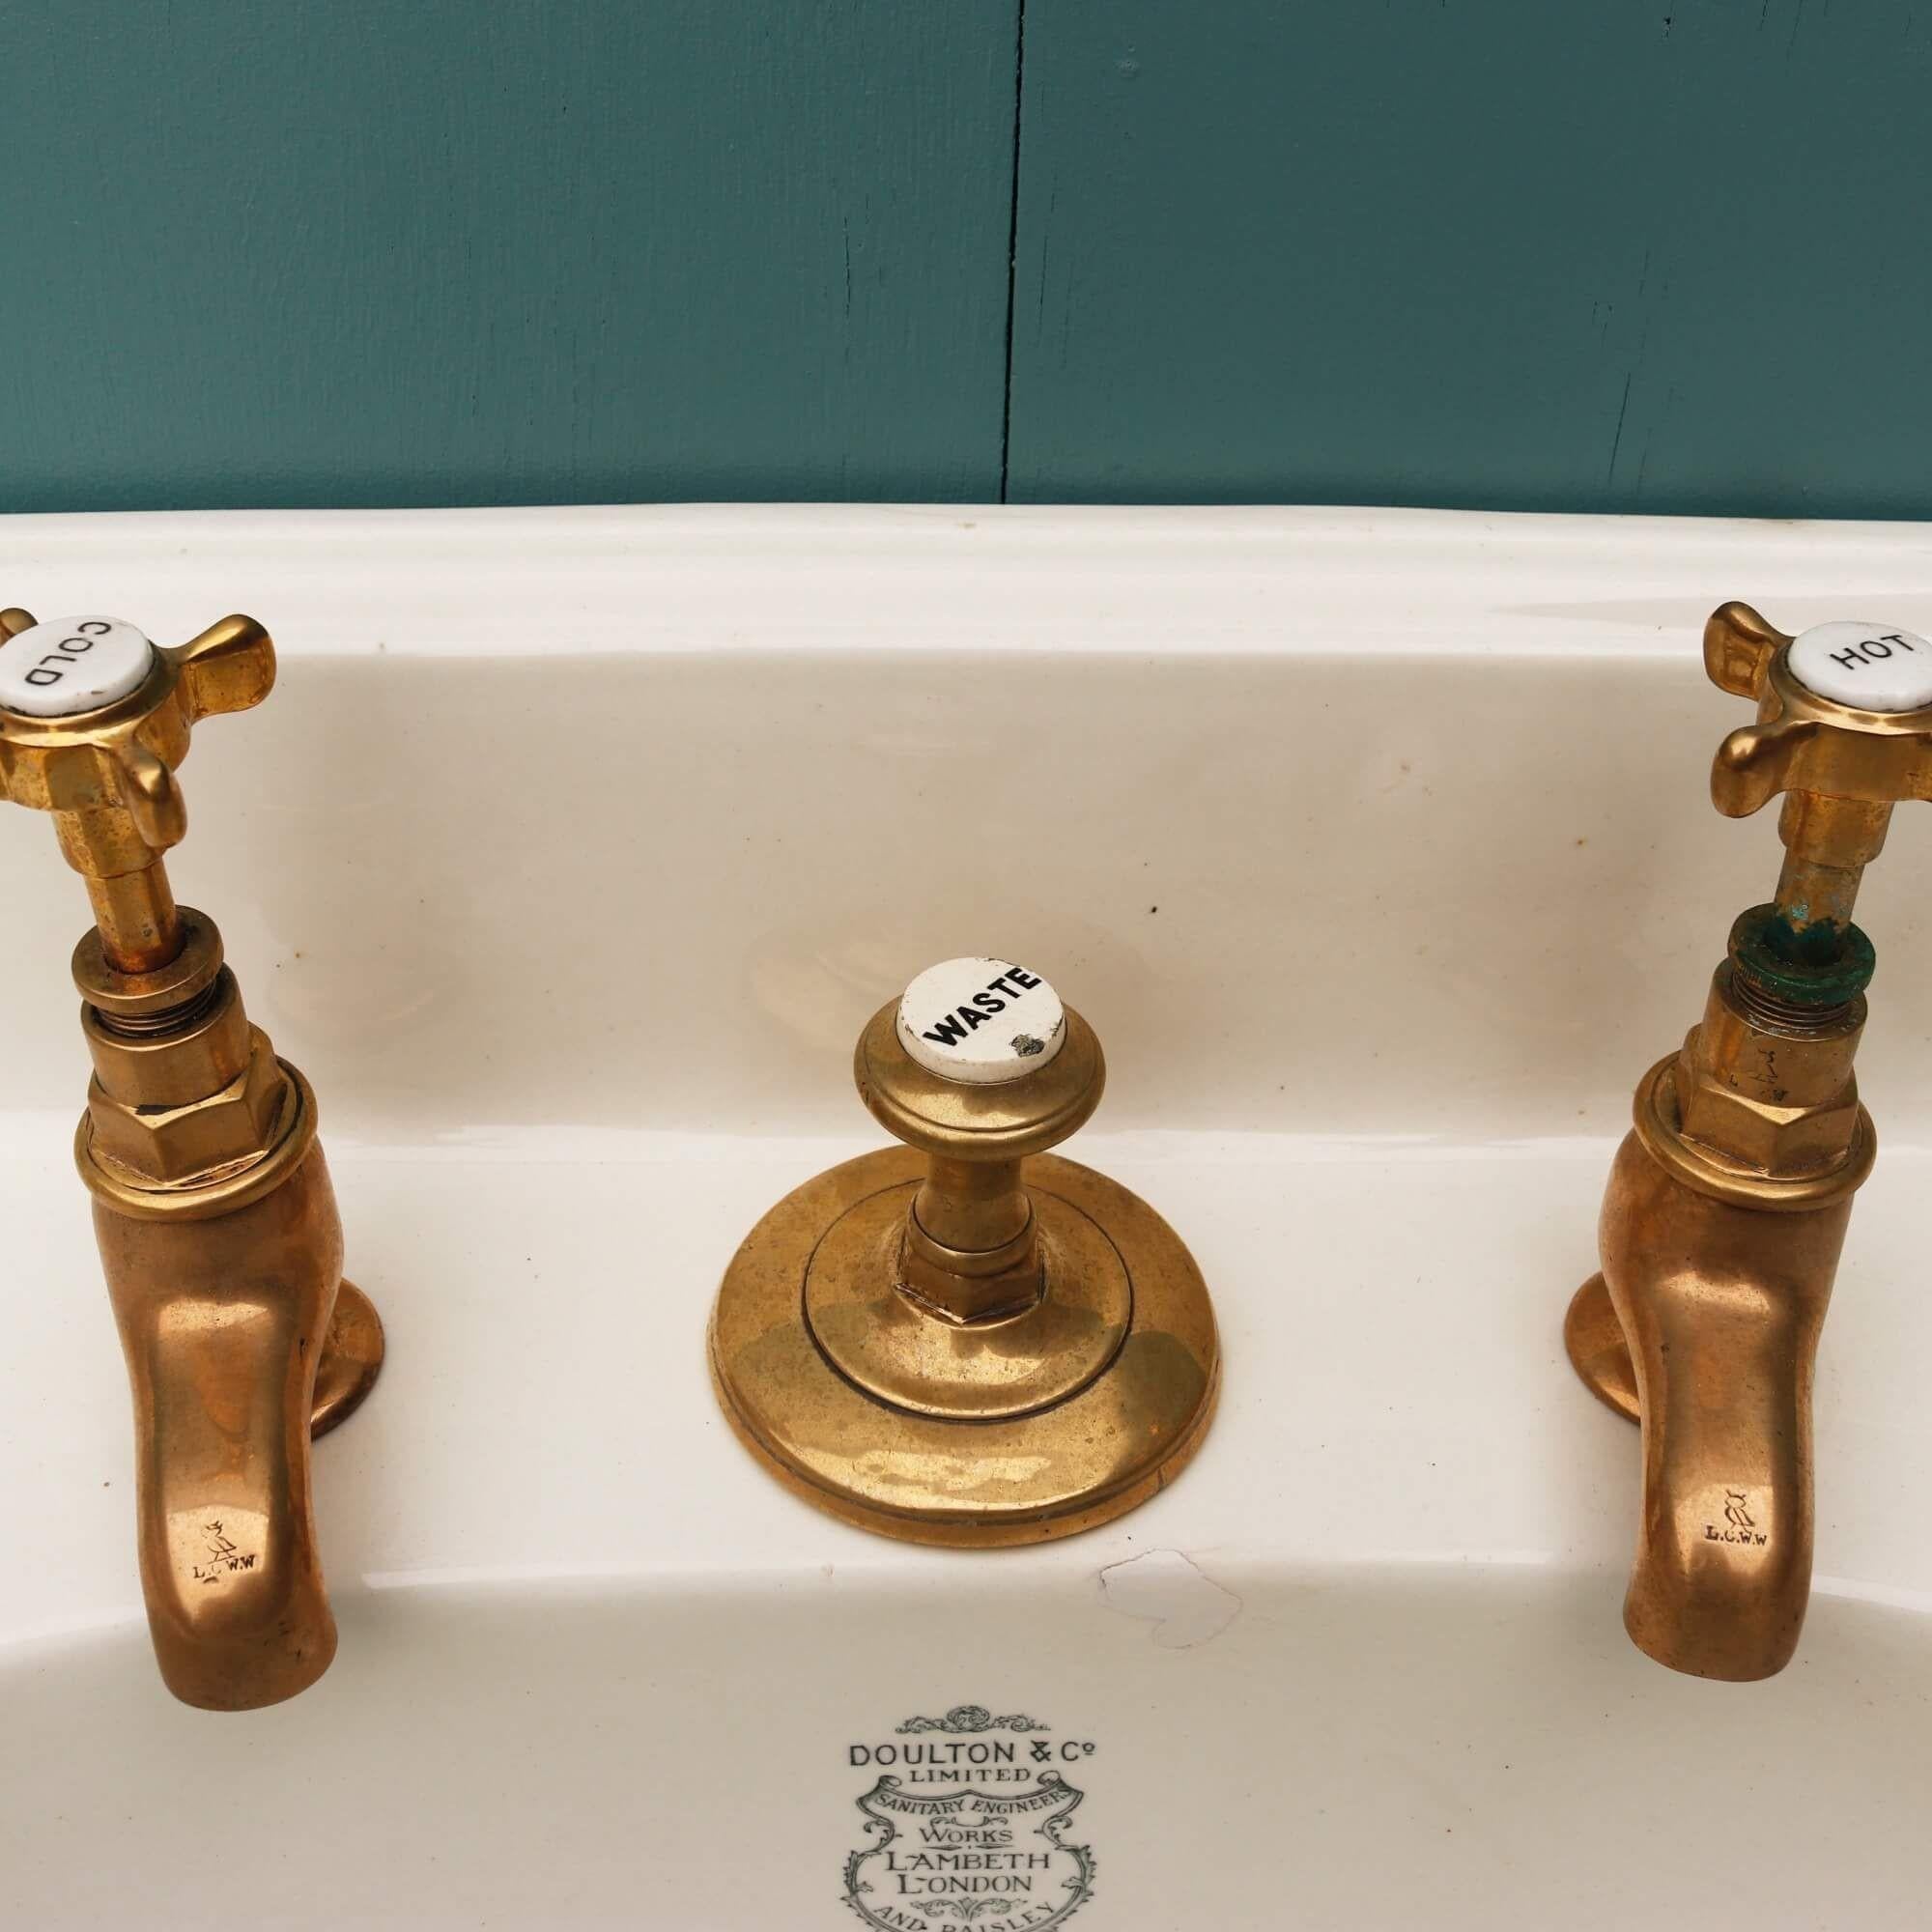 Doulton & Co. Curved Front Plunger Basin with Bracket 1